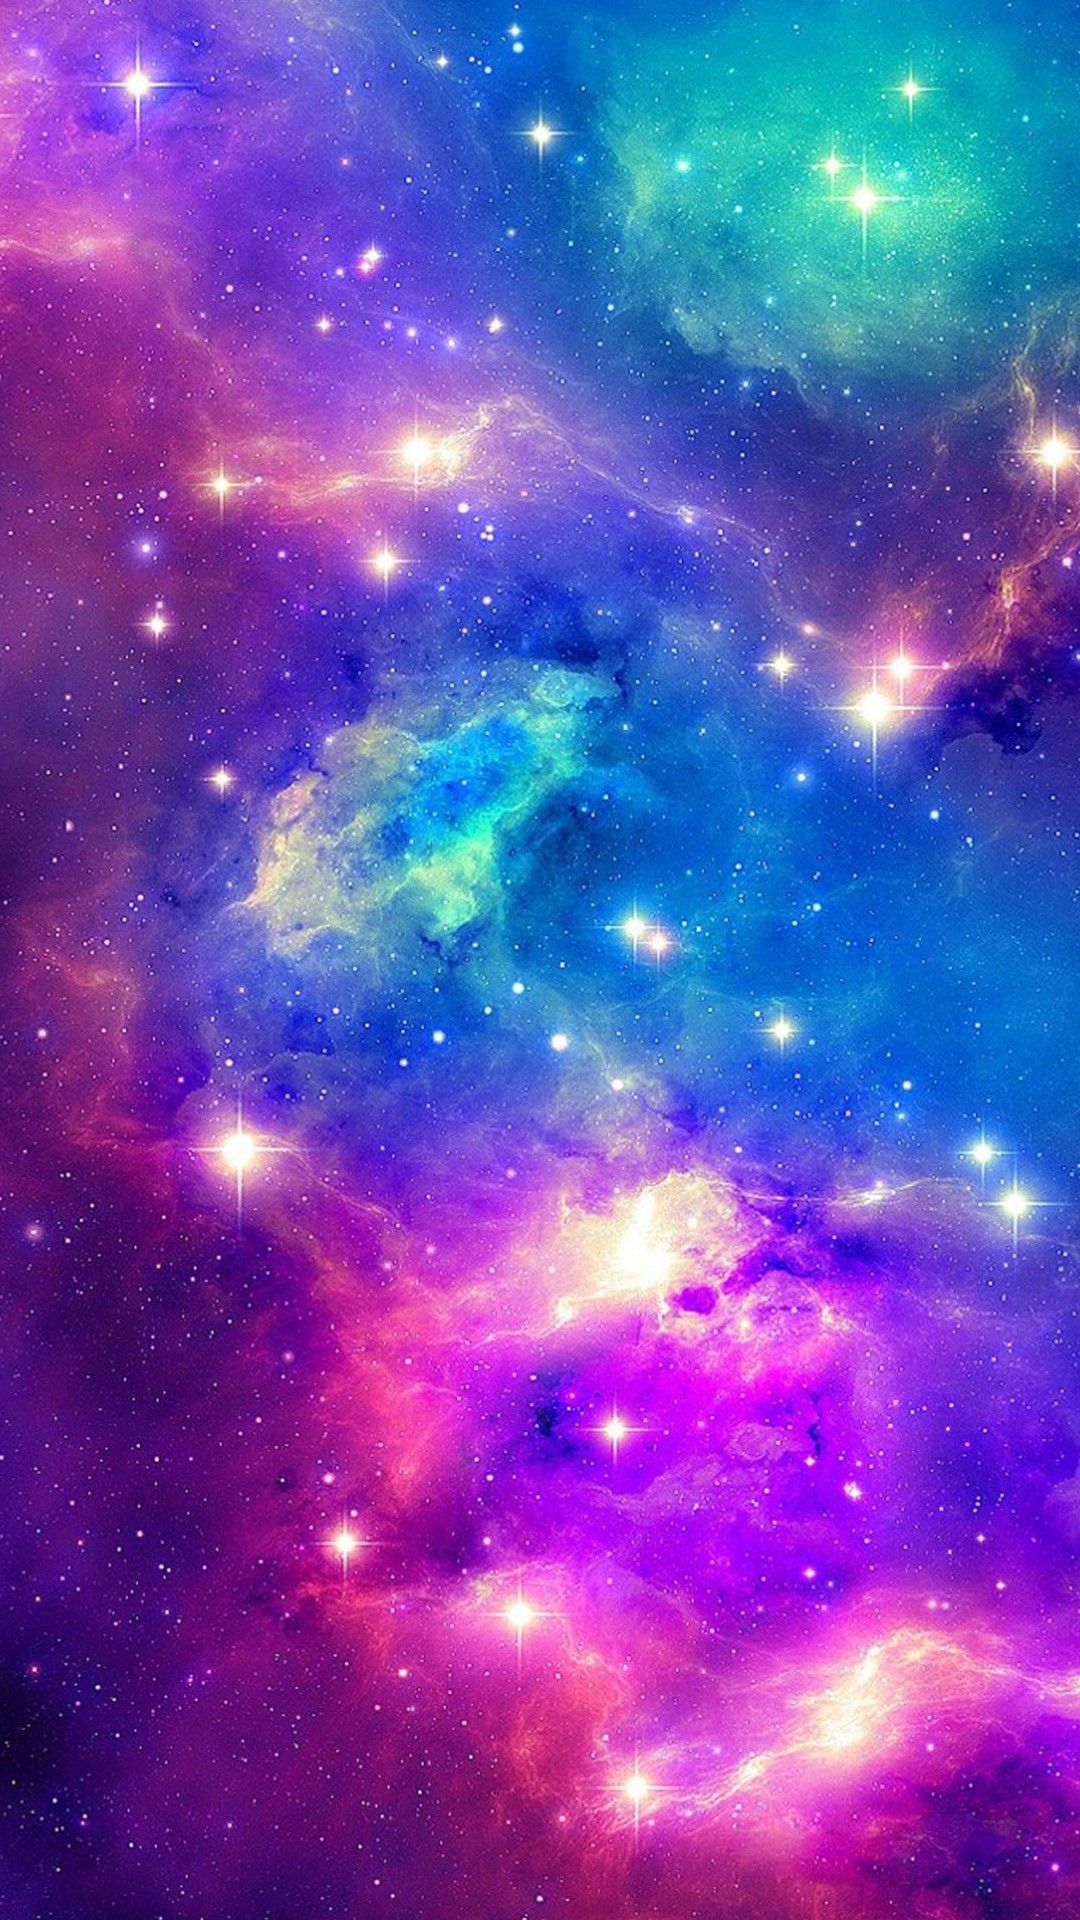 New HD Pastel Galaxy Background Picture On Home Screen In Kecbio